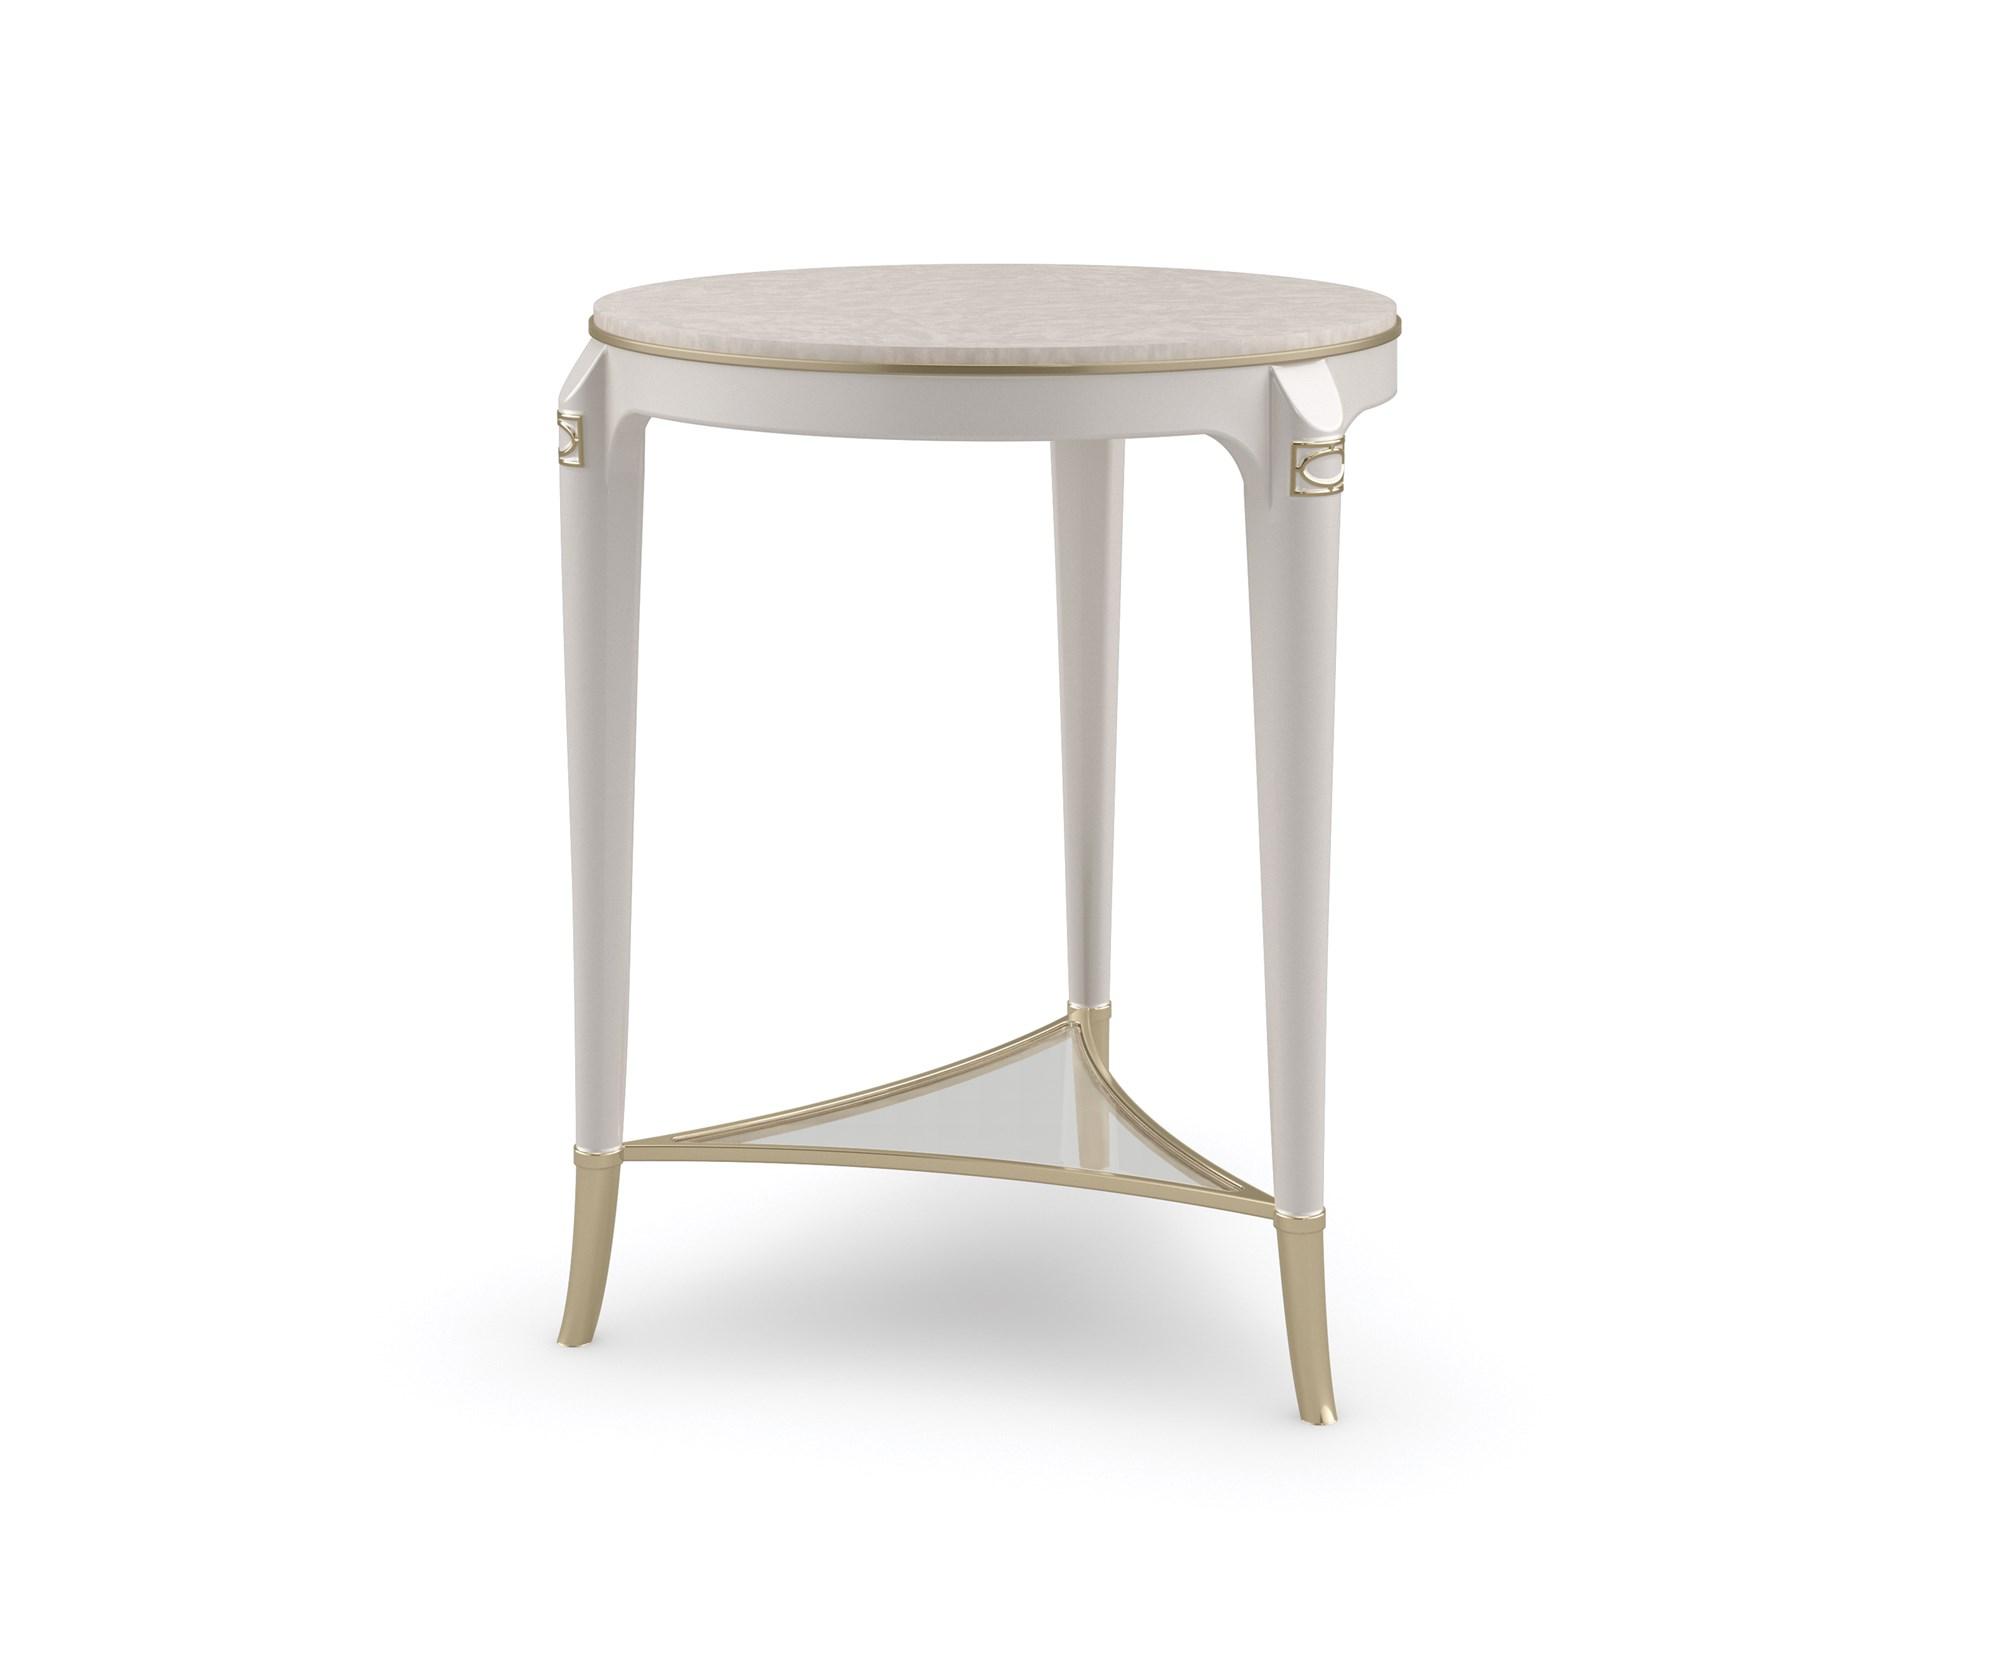 Contemporary End Table MATCHED UP CLA-021-412 in Platinum, Silver 